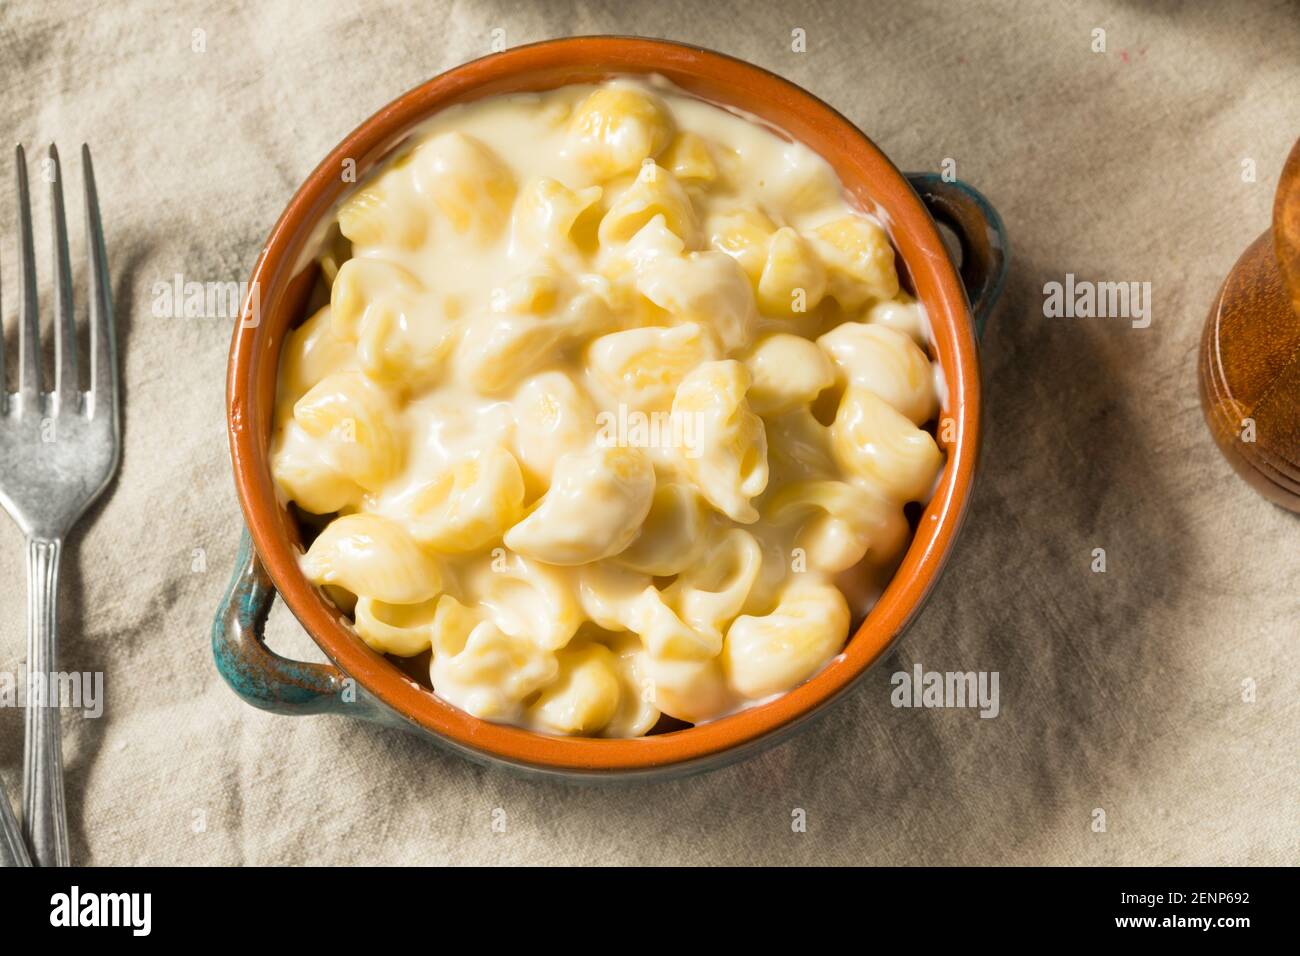 Healthy Homemade White Macaroni and Cheese in a Bowl Stock Photo